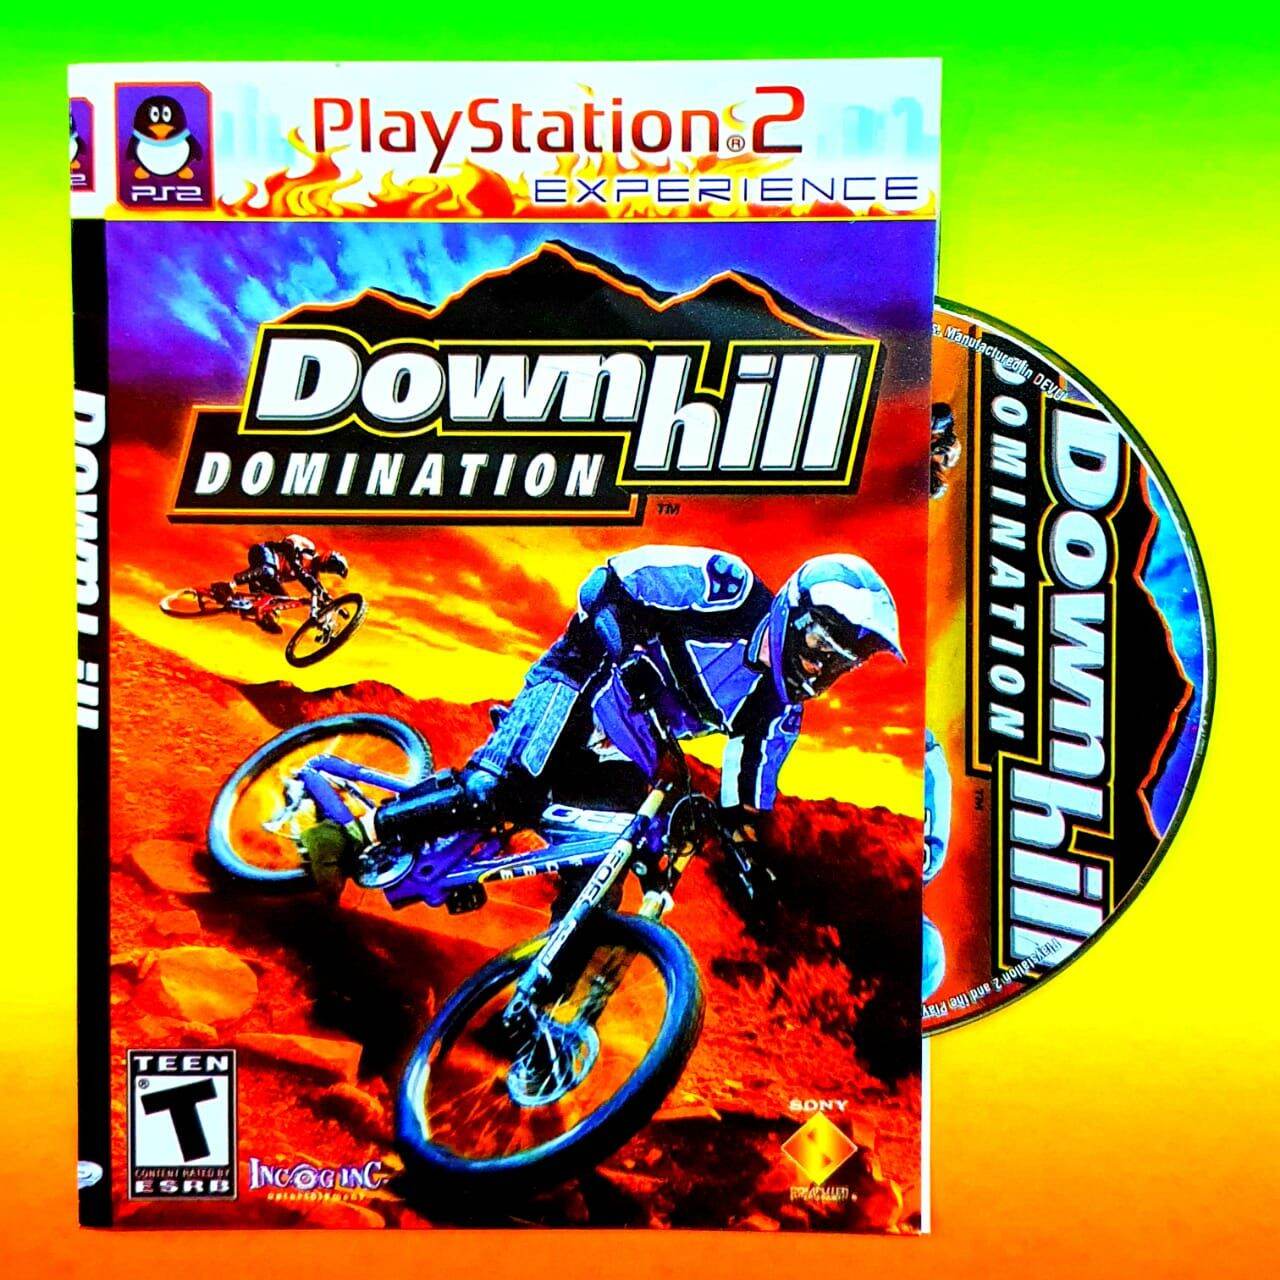 Kaset Video Game Playstation Ps 2 Down Hill Game Sepeda Downhill-Video Game Ps 2 Balapan Sepeda-Kaset Playstation Ps 2 Game Sepeda Balap-Maianan Anak Anak Video Game Ps 2 Terbaru Terlaris-Kaset Ps 2